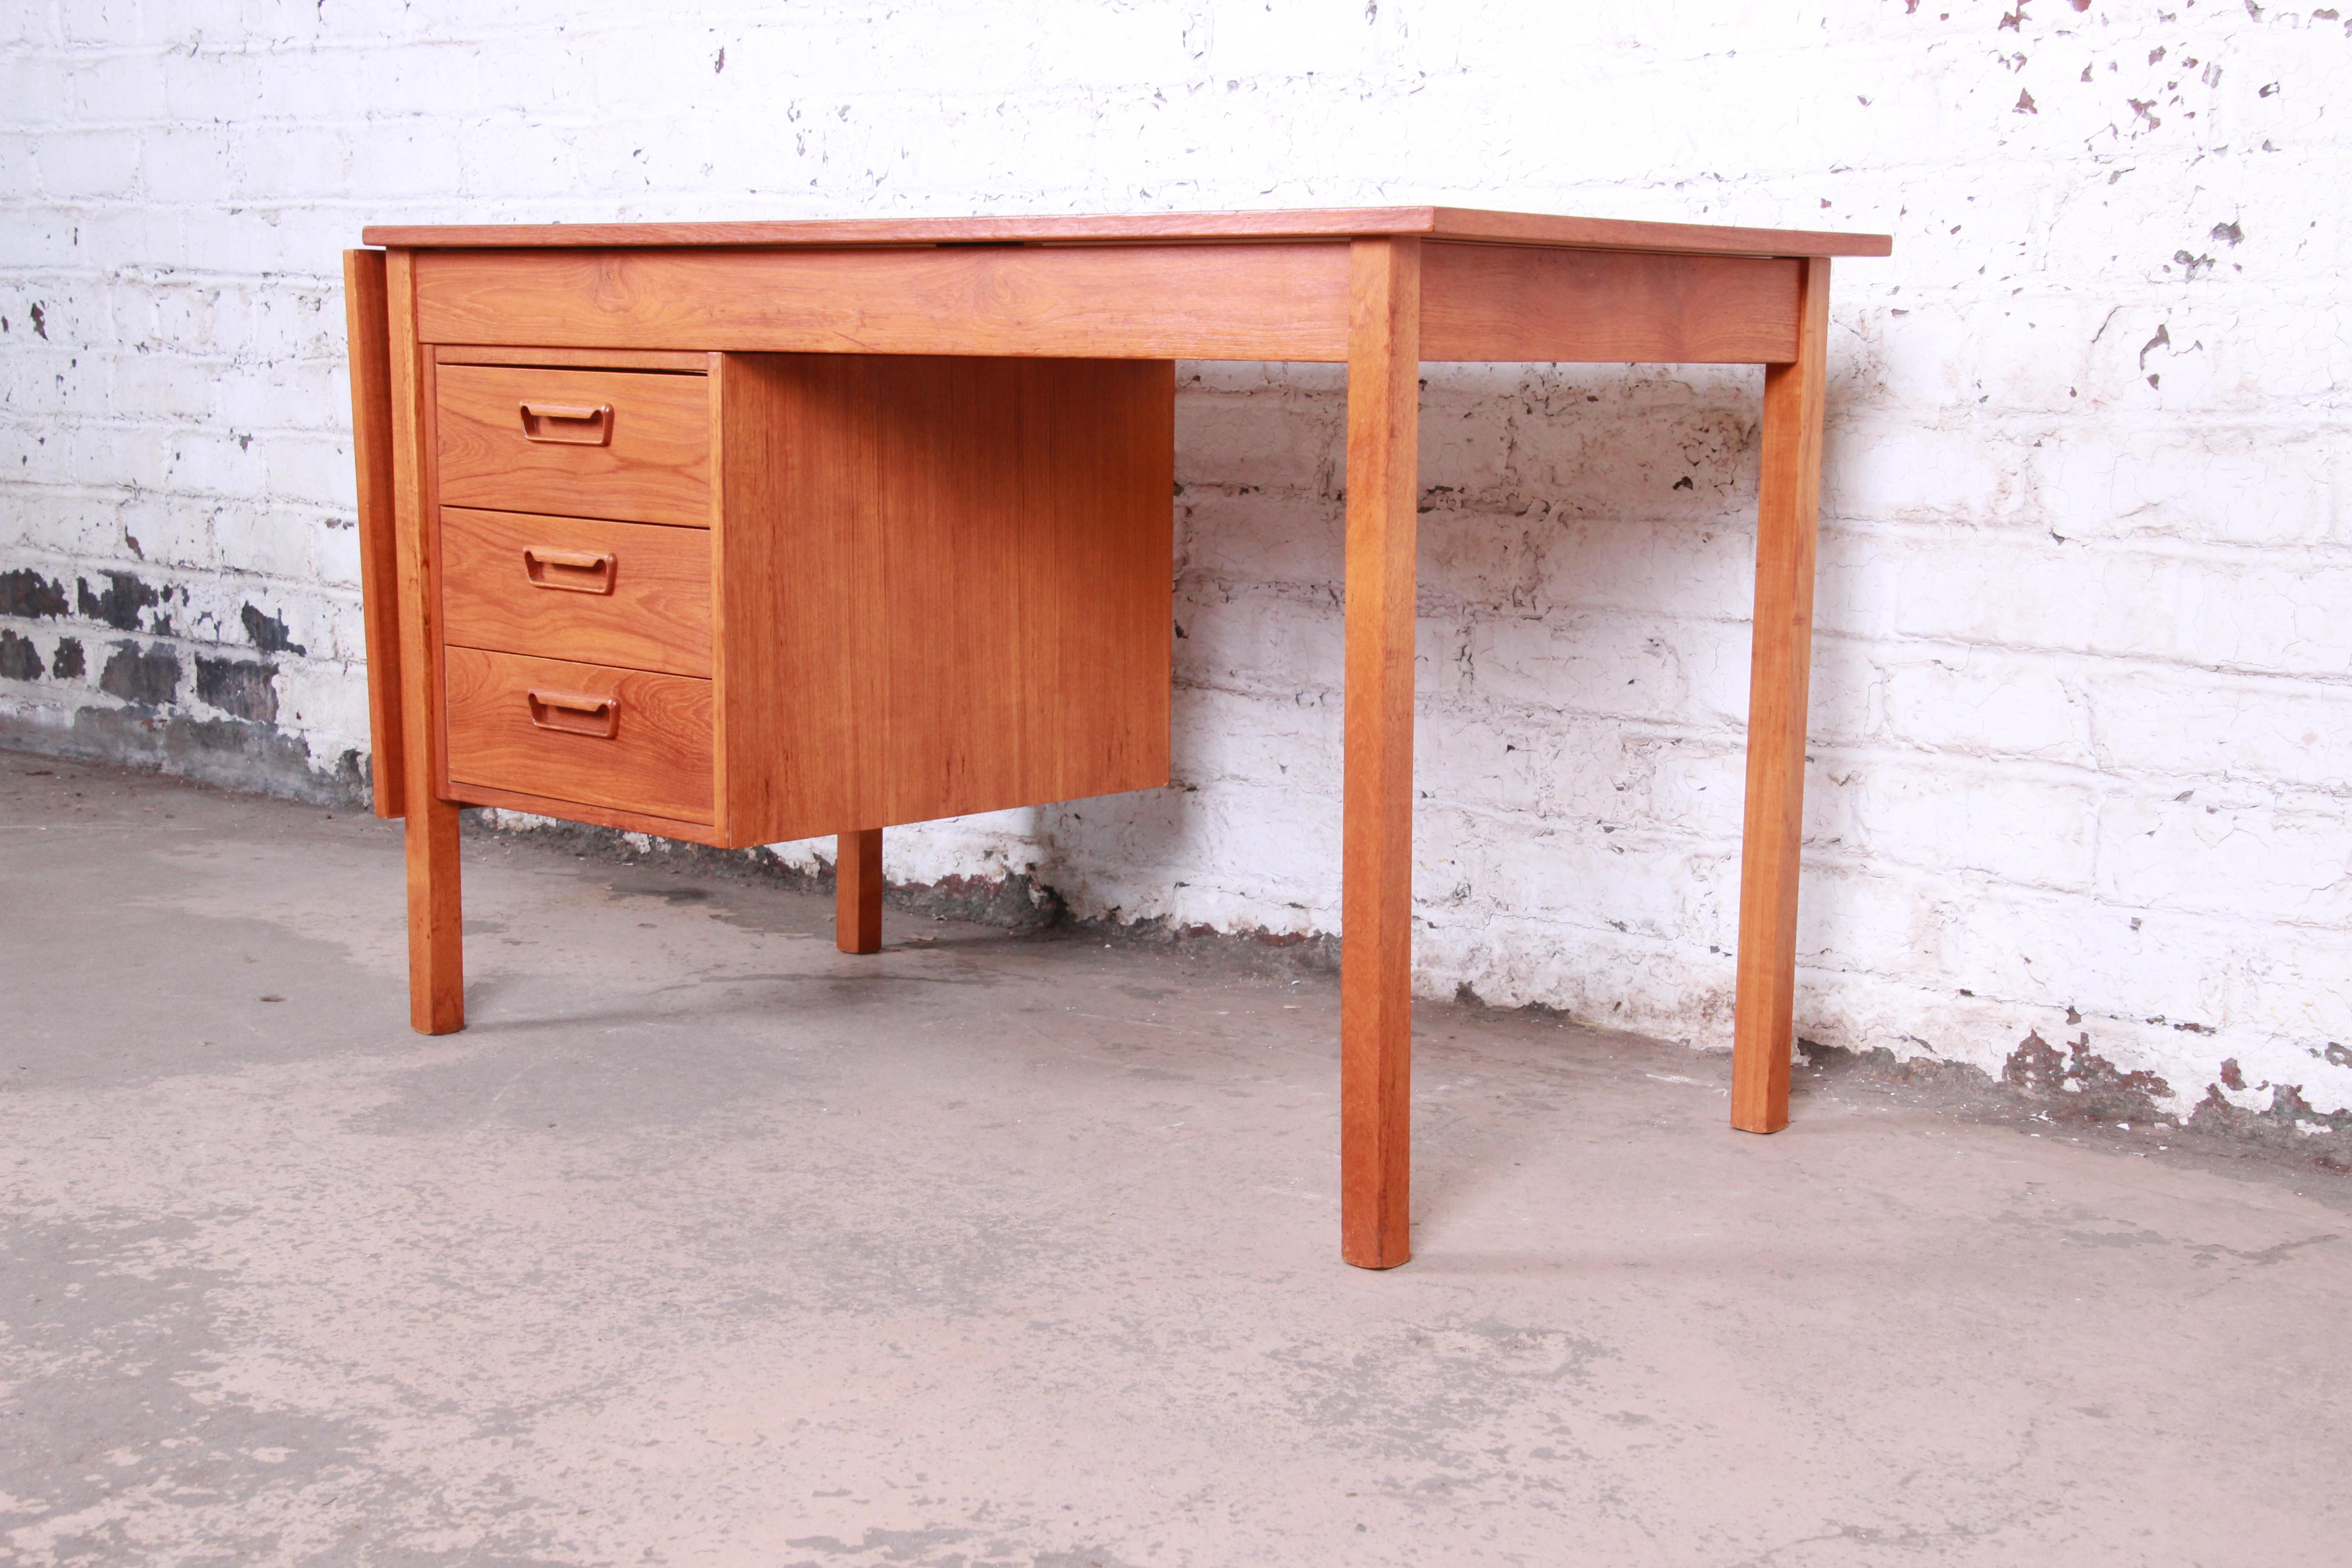 A gorgeous Danish modern teak drop-leaf desk. The desk features stunning teak wood grain and sleek, minimalist midcentury Danish design. It offers good storage with three drawers, and the leaf flips up to extend the table top. The desk is finished